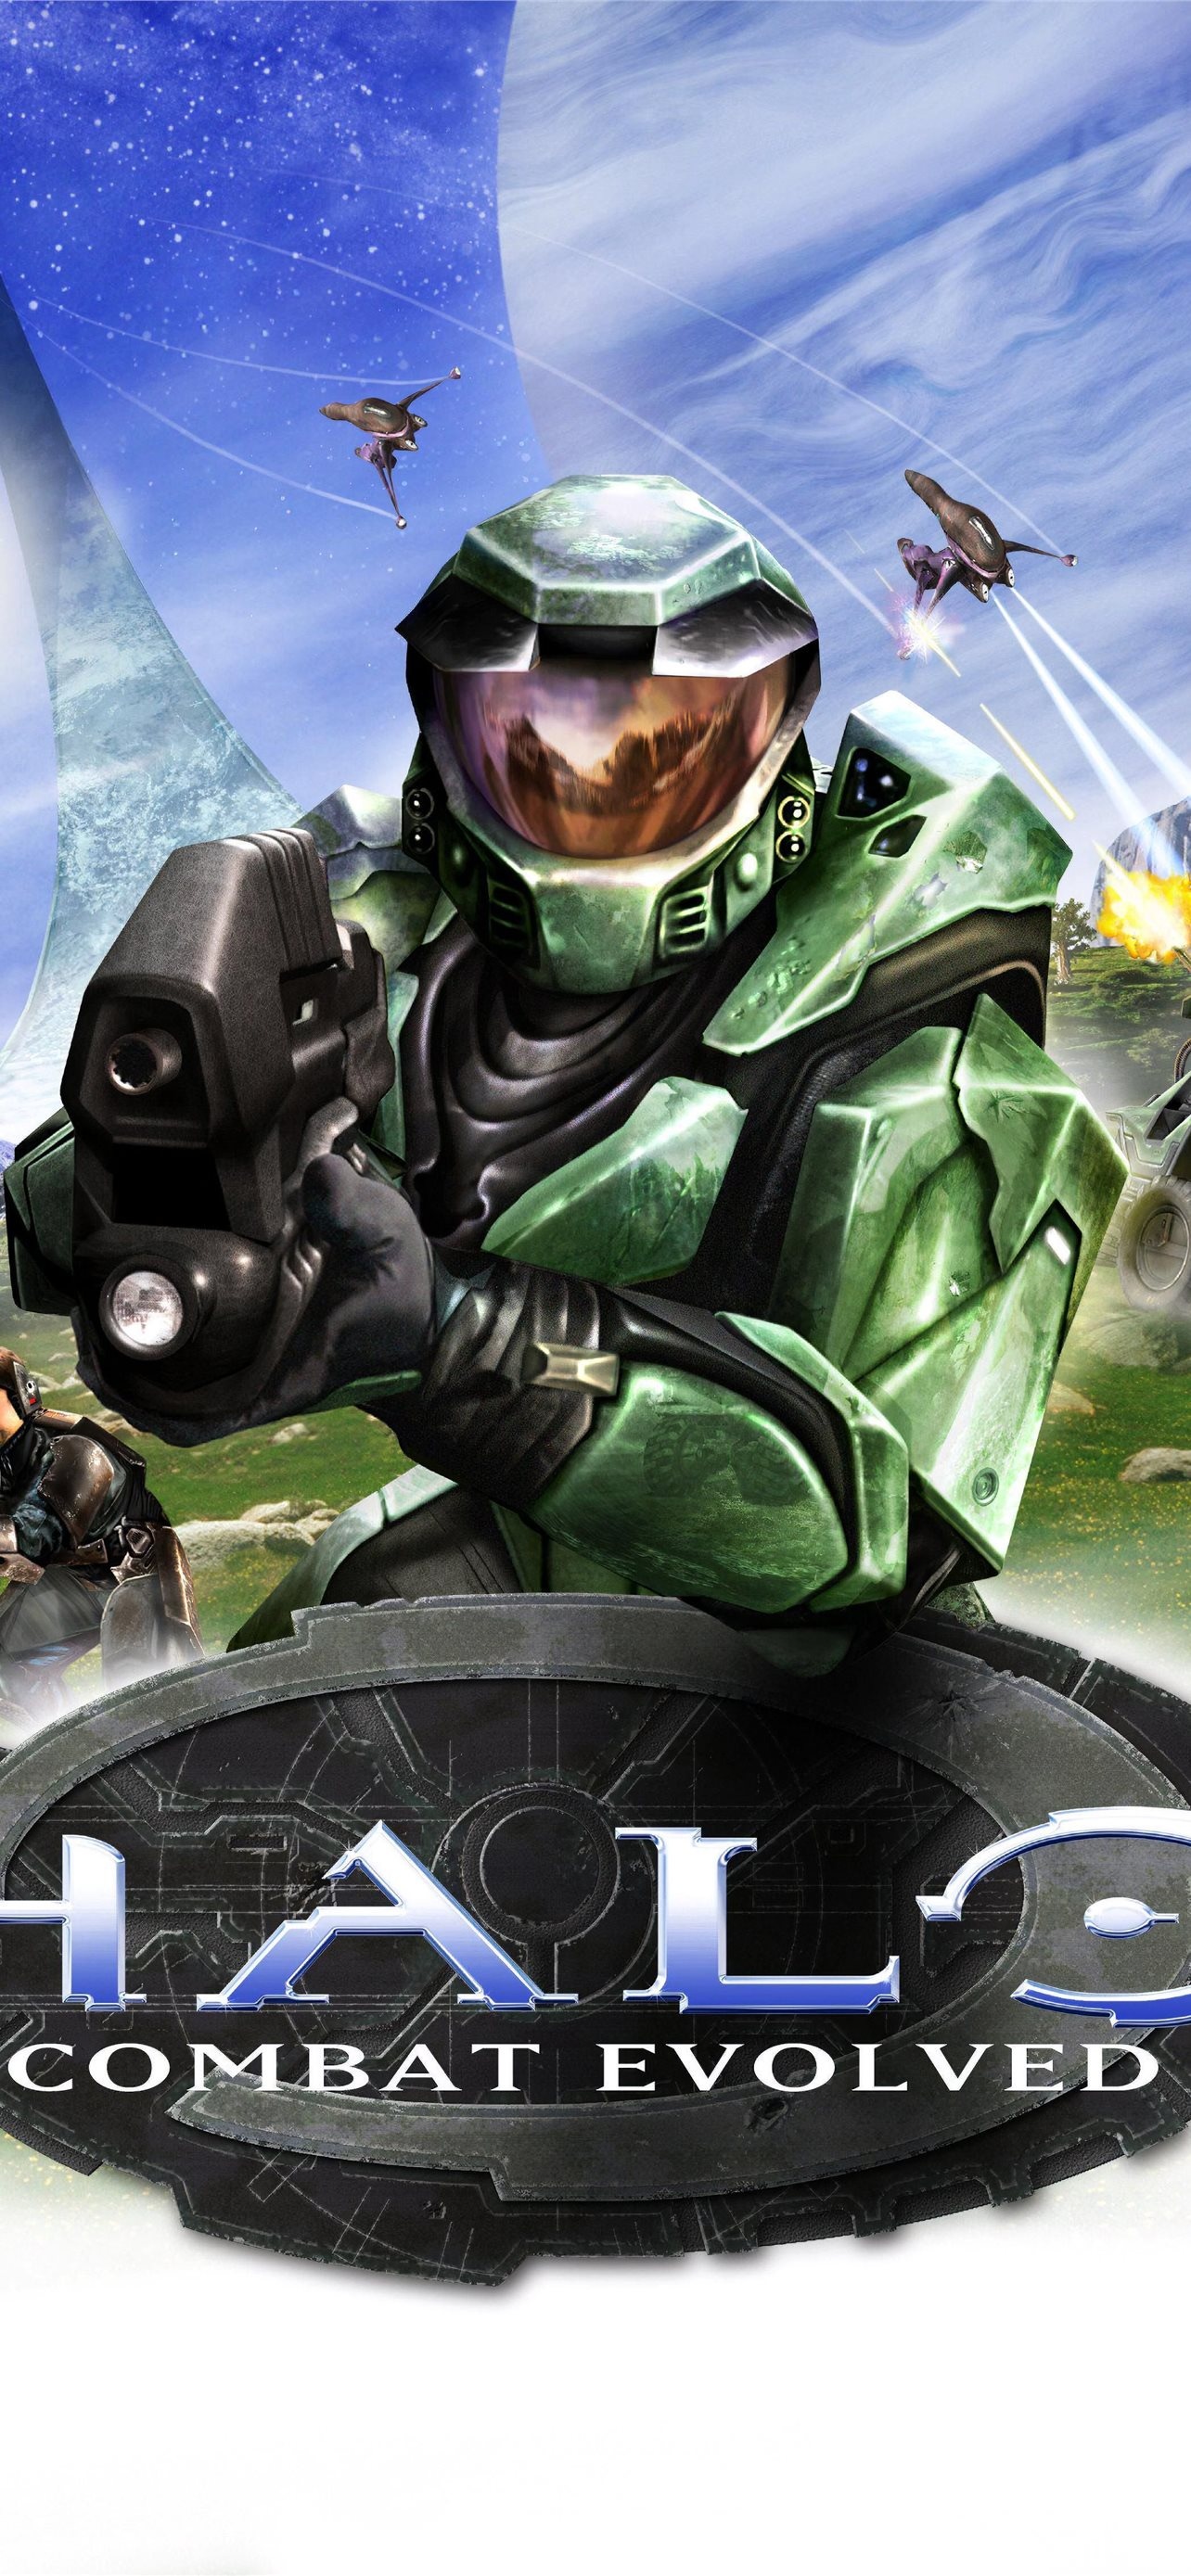 Best Halo CE wallpapers, iPhone HD collection, I Like Wallpaper's recommendations, Stylish and sleek designs, 1290x2780 HD Handy